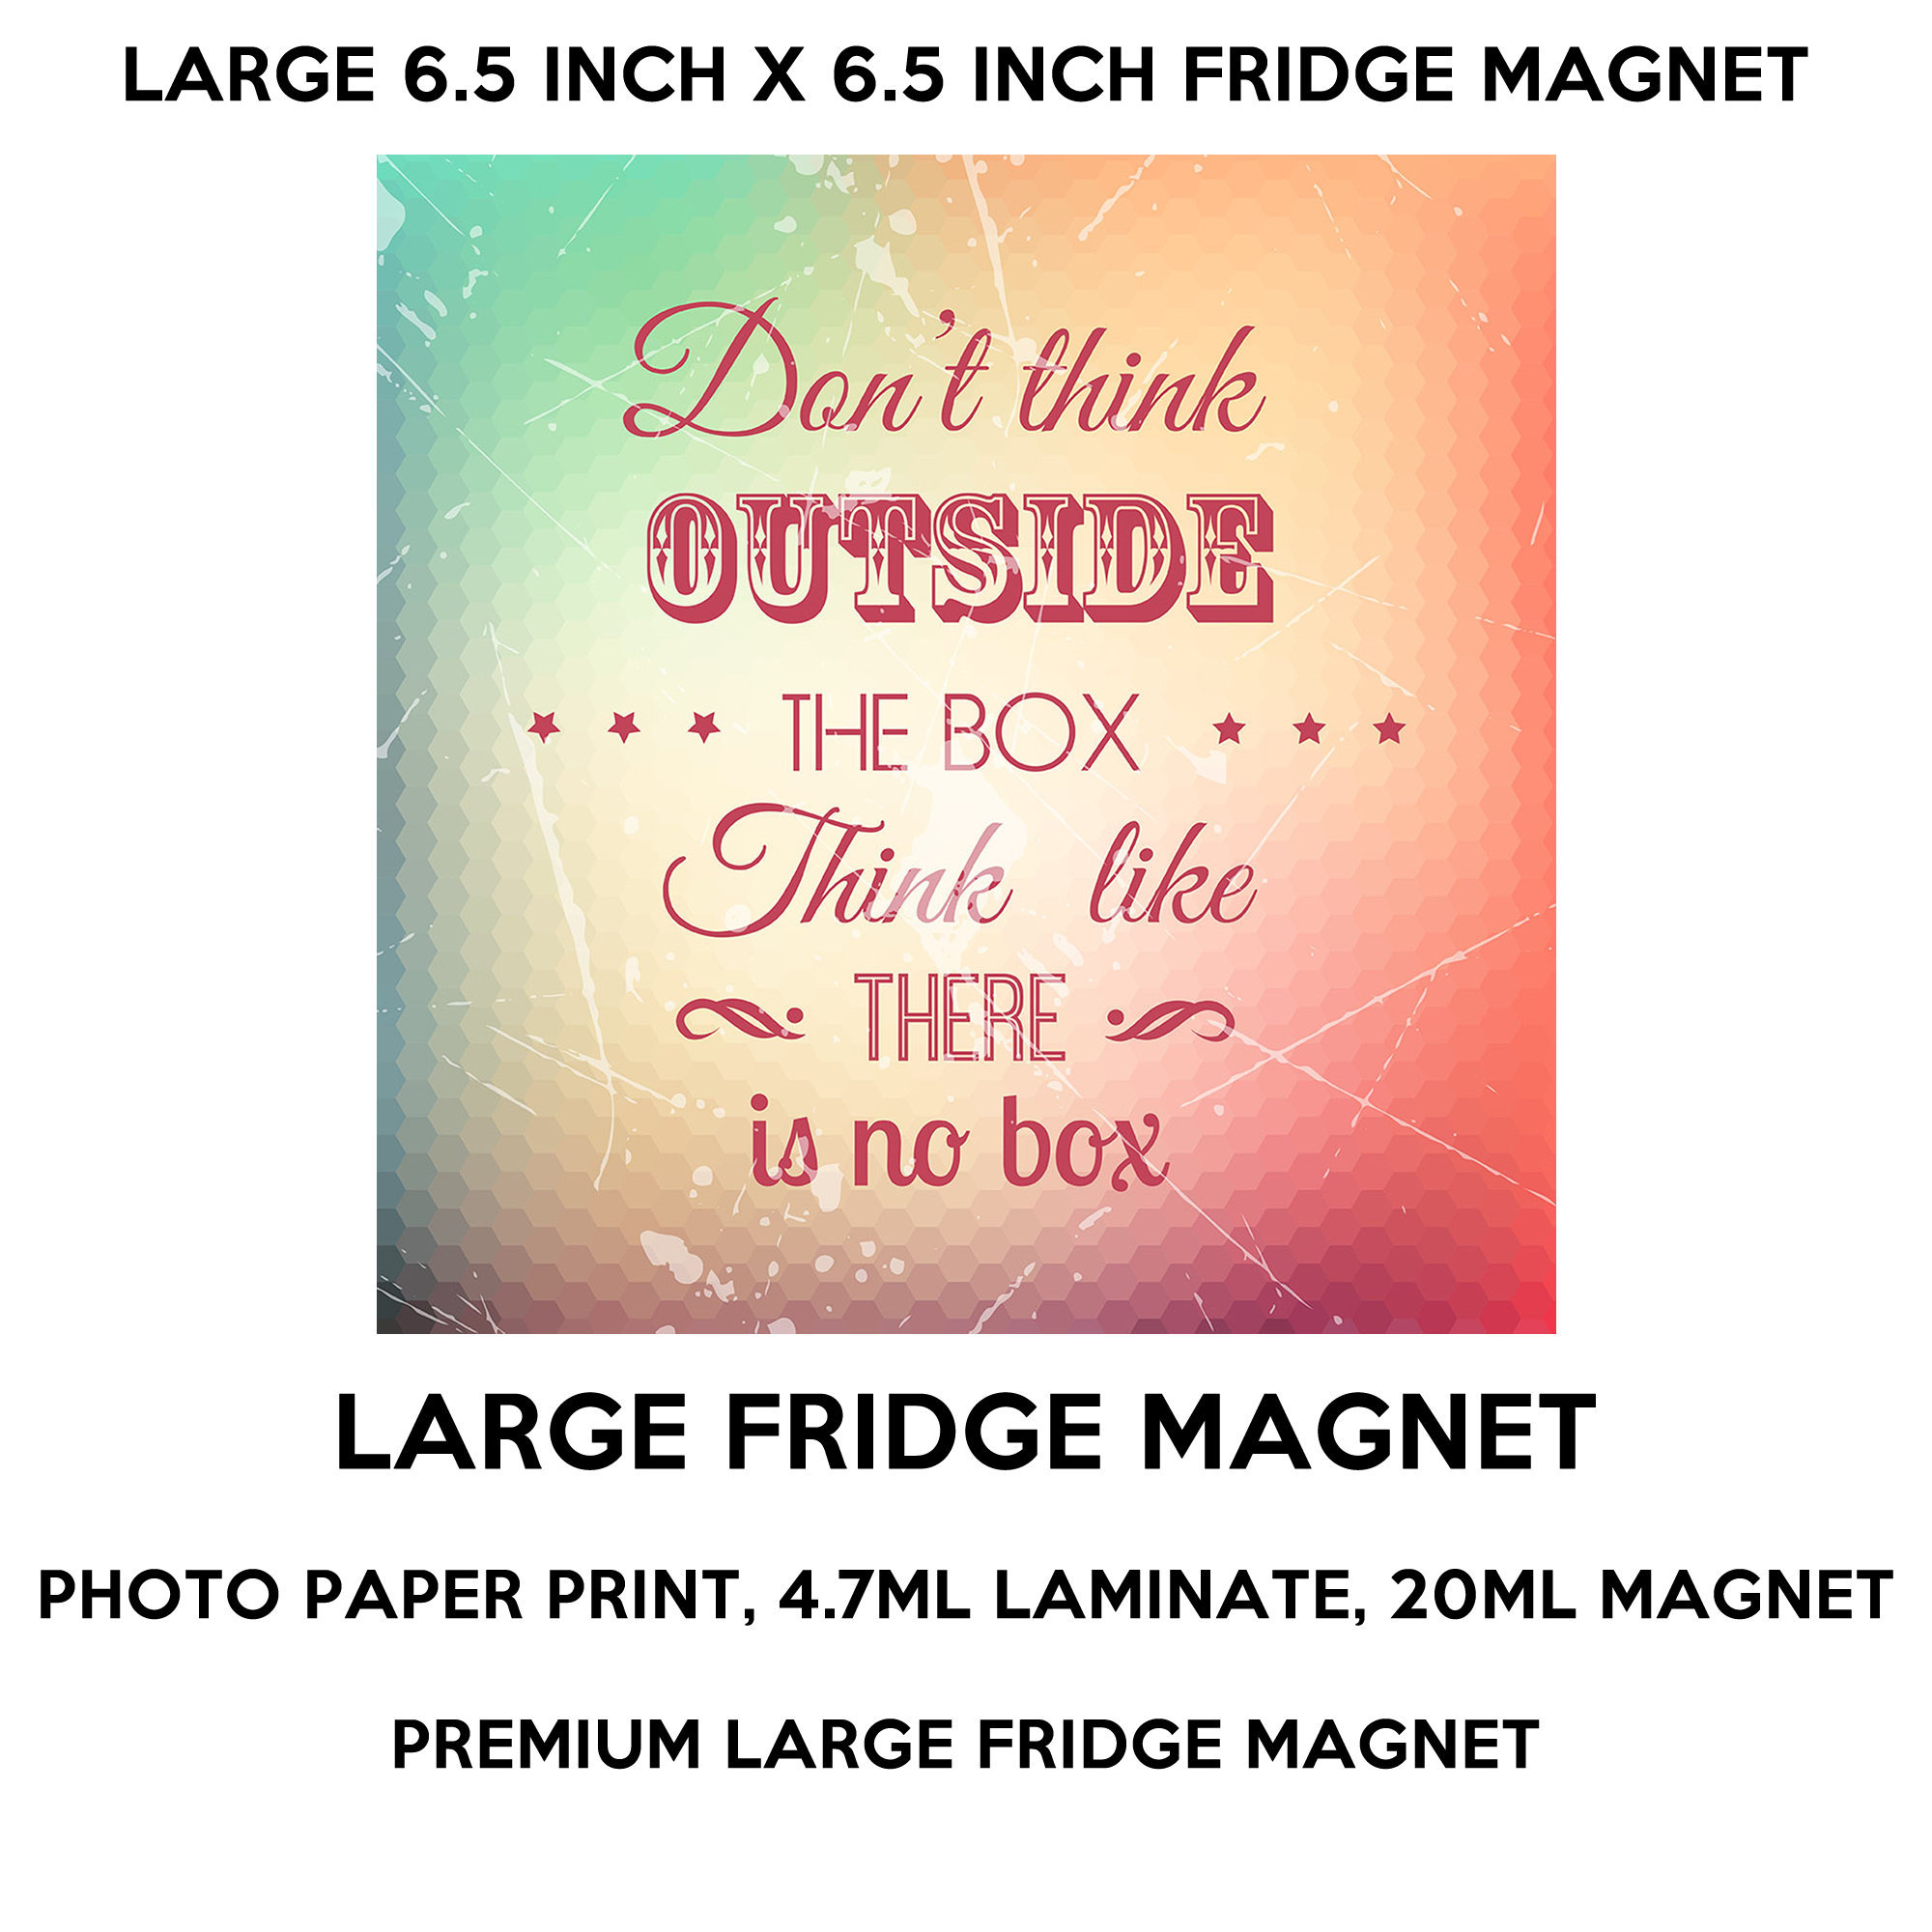 Don't think outside the box think like there is no box 6.5 inch x 6.5 inch premium fridge magnet that stands out.